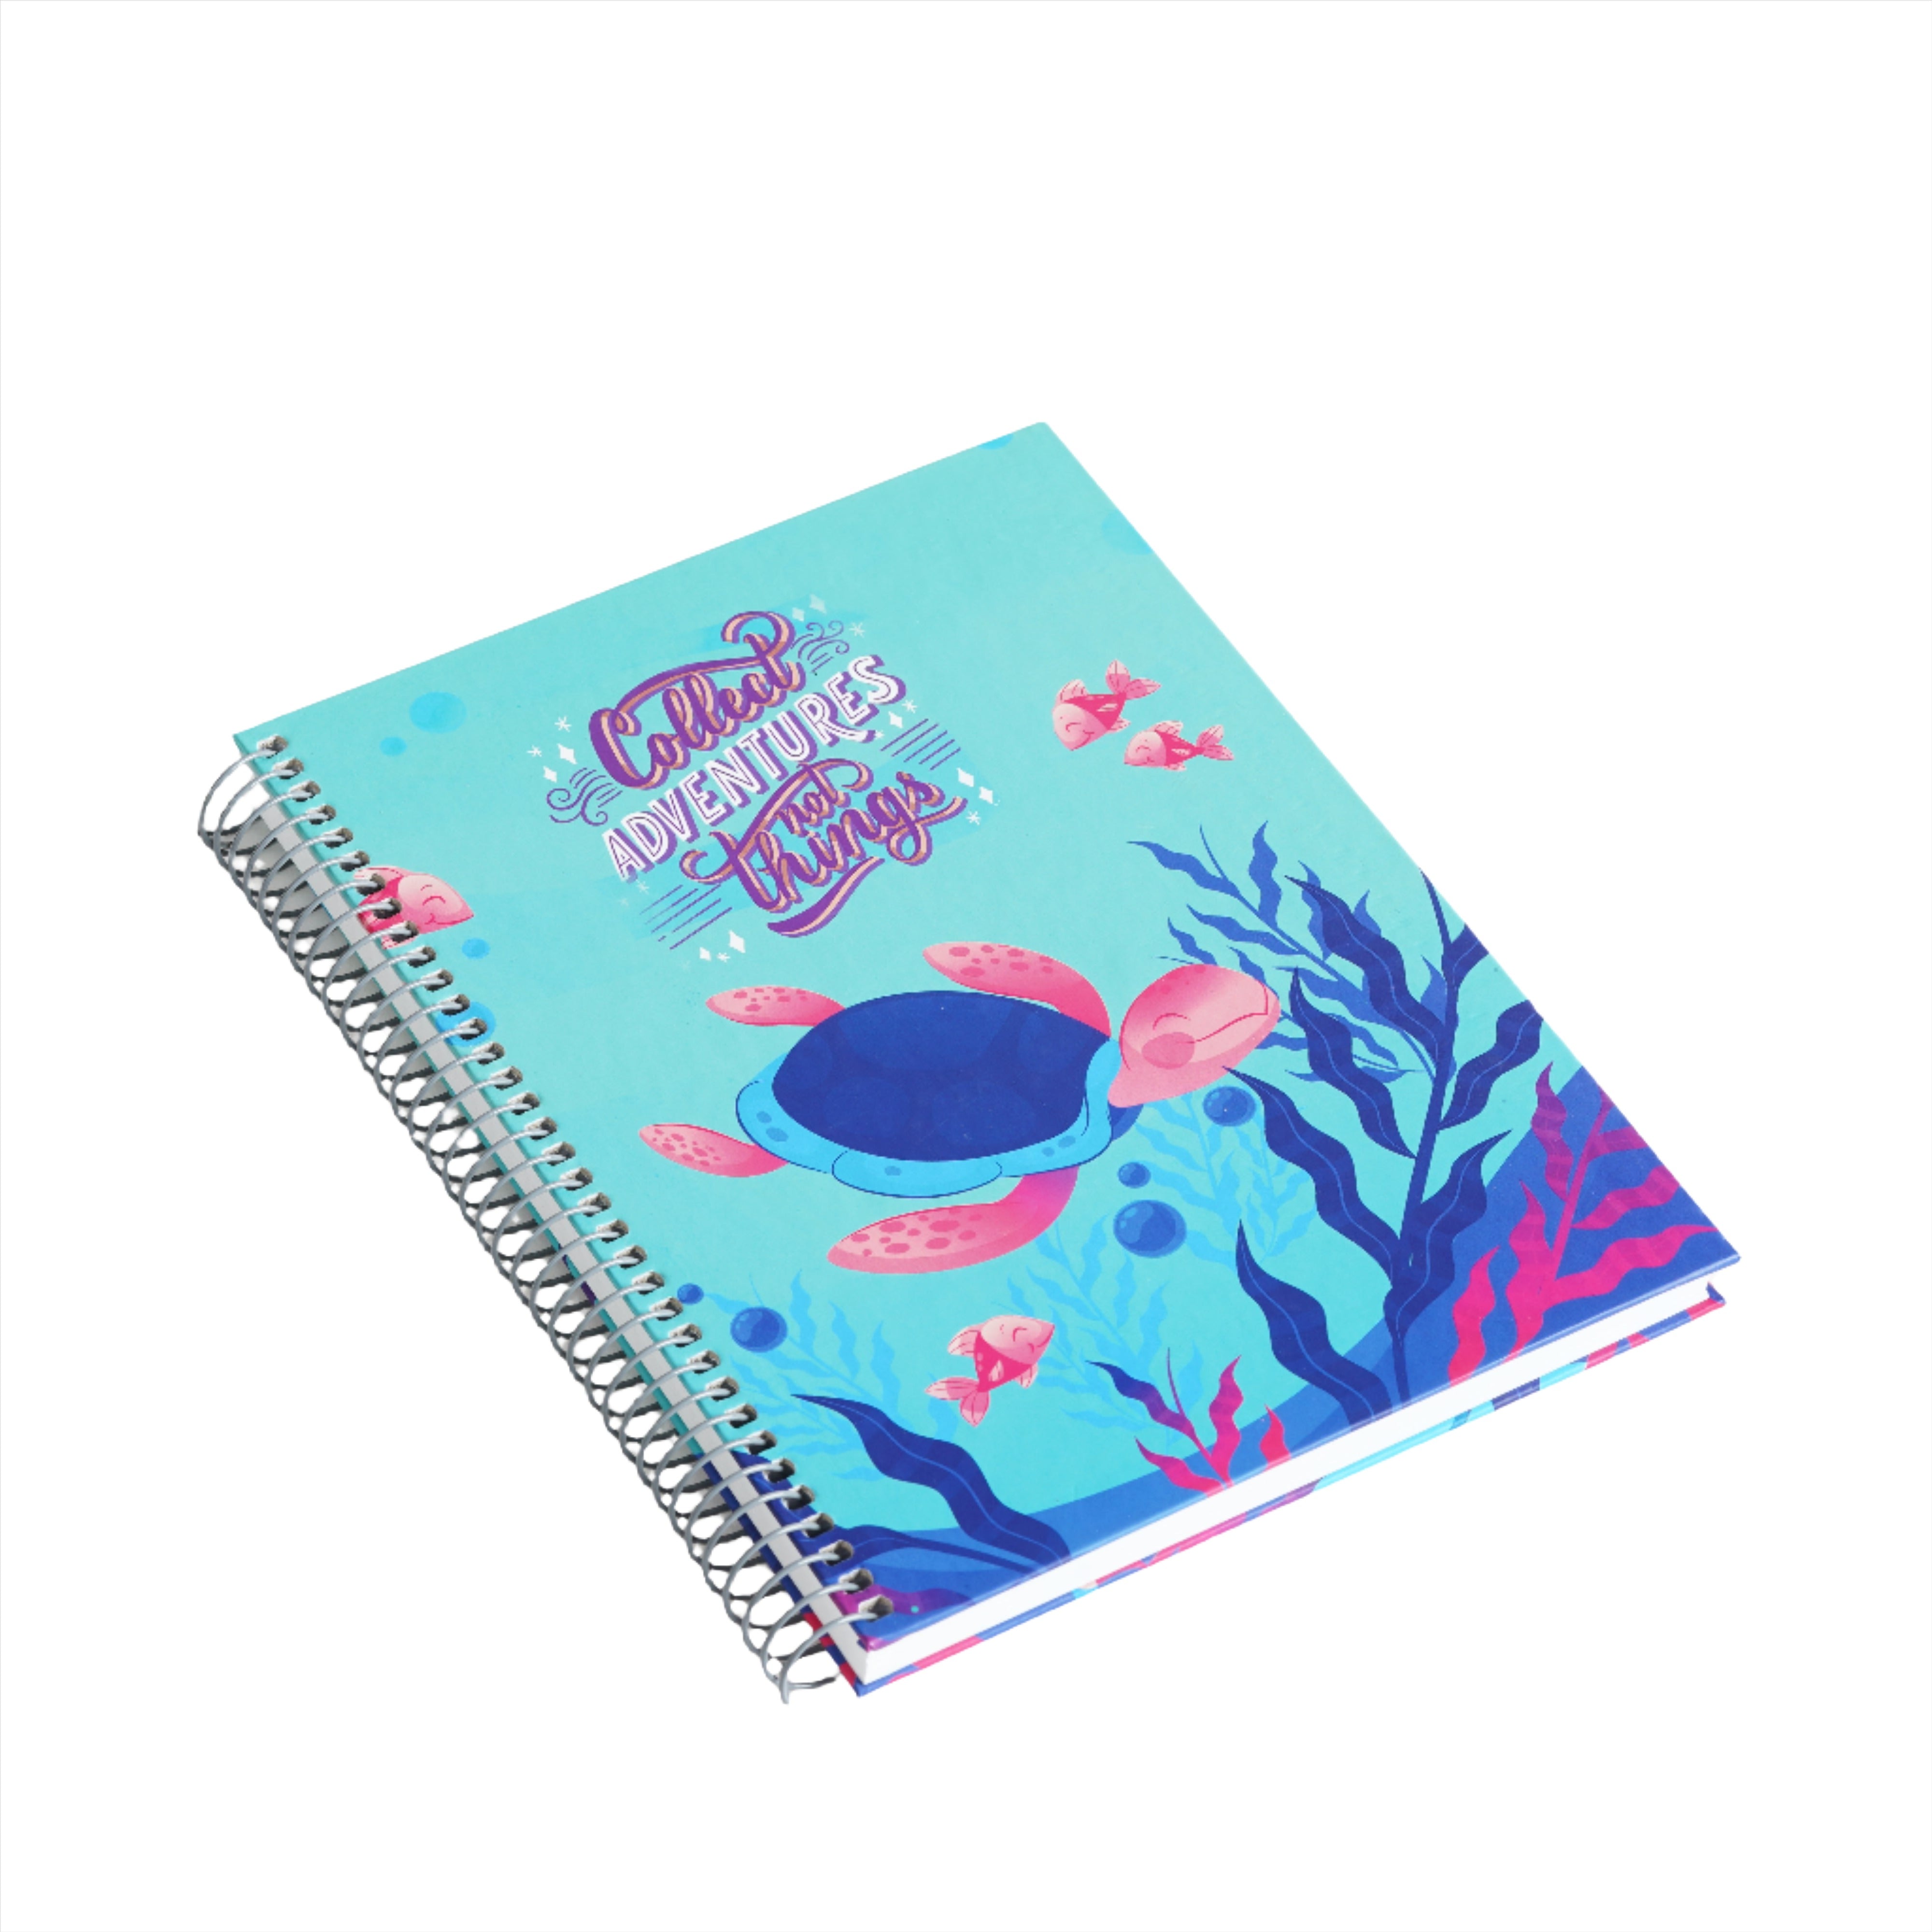 2BE Spiral Notebook B5 160 sheets - Collect adventures not things